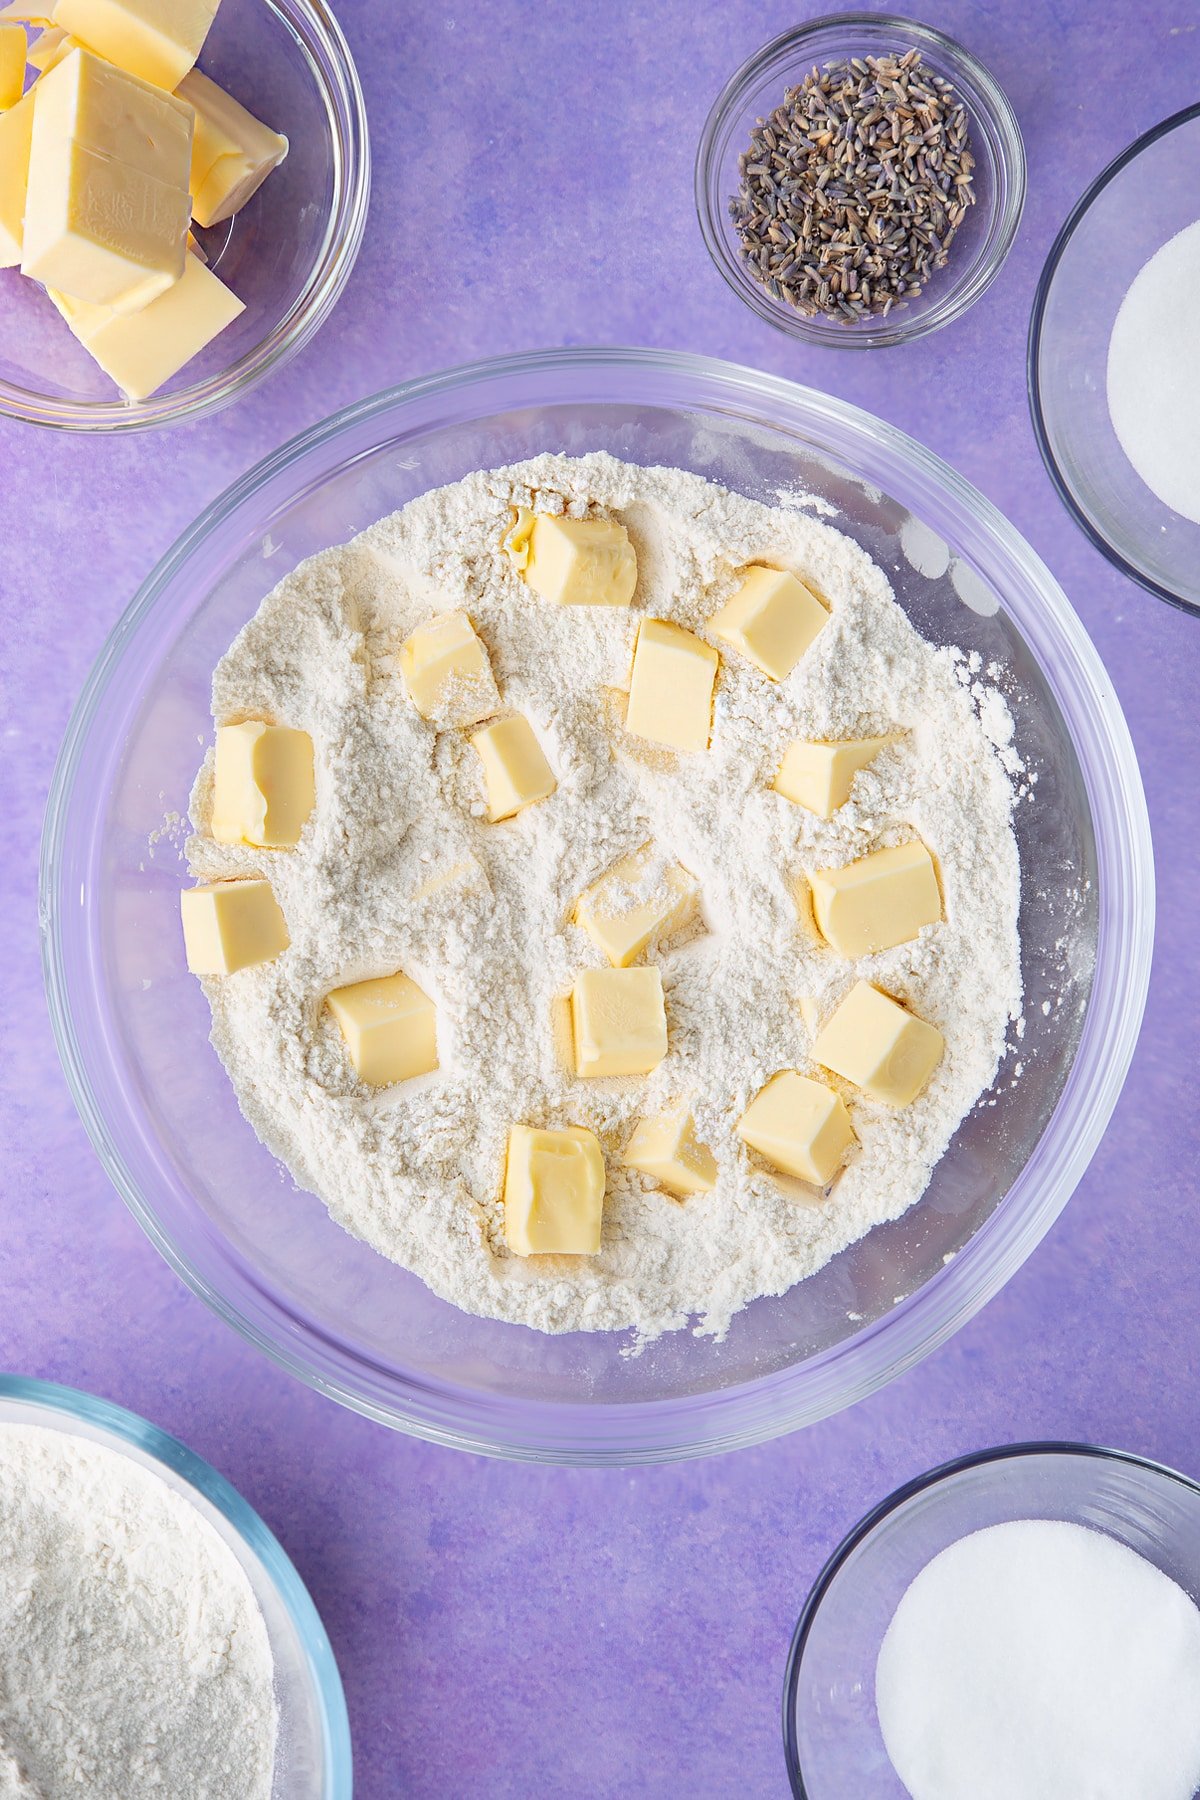 Flour, sugar with cubed butter on top in a bowl. Ingredients to make lavender shortbread cookies.